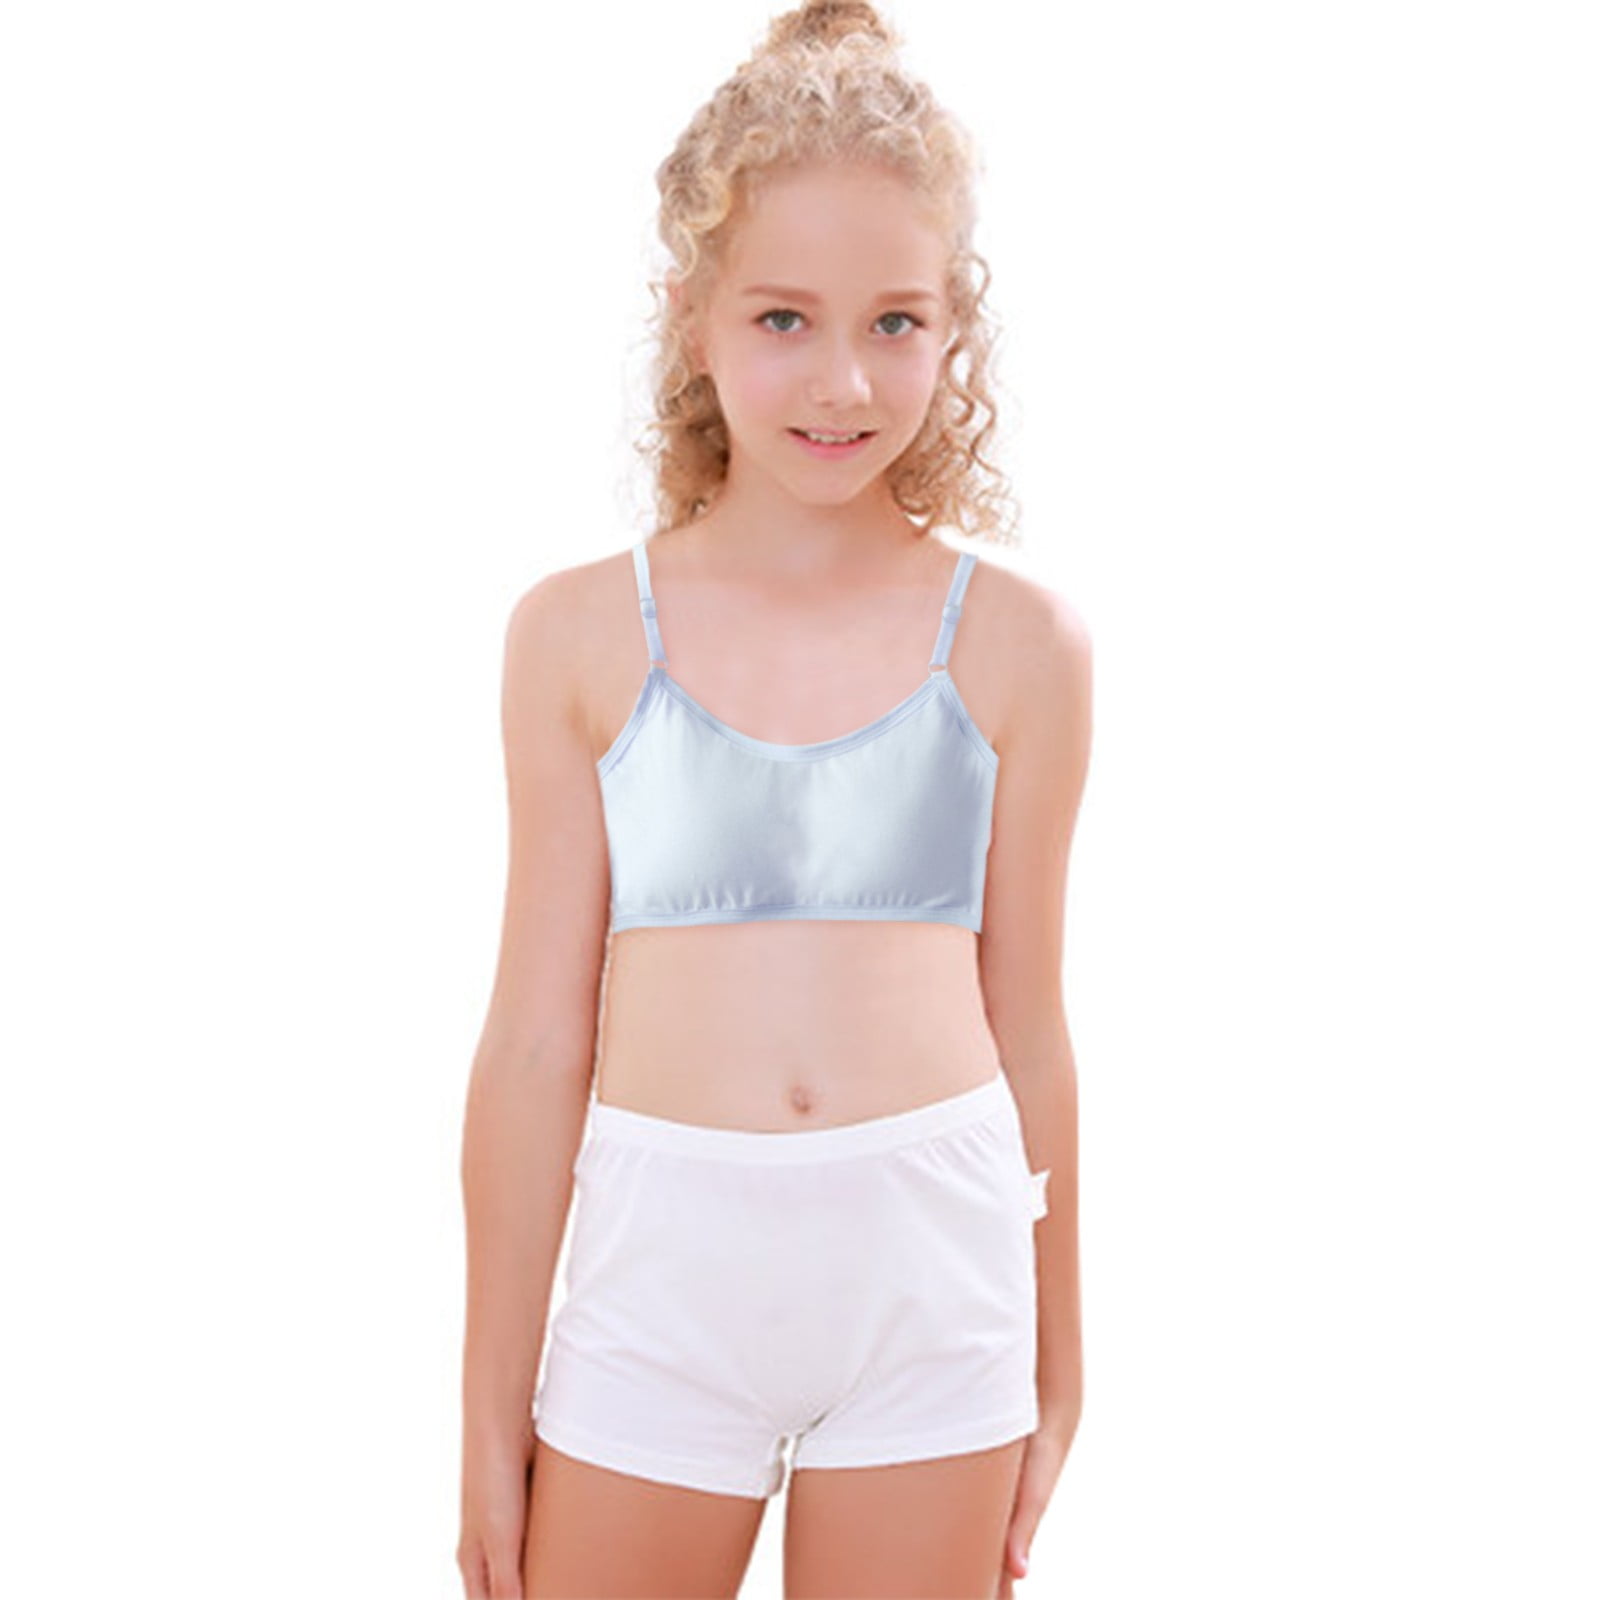 Our Super soft cotton vests & teenage training bras are the best choice for  your little girl. ♥️☁️🙆 Do check out our new junior & teens…